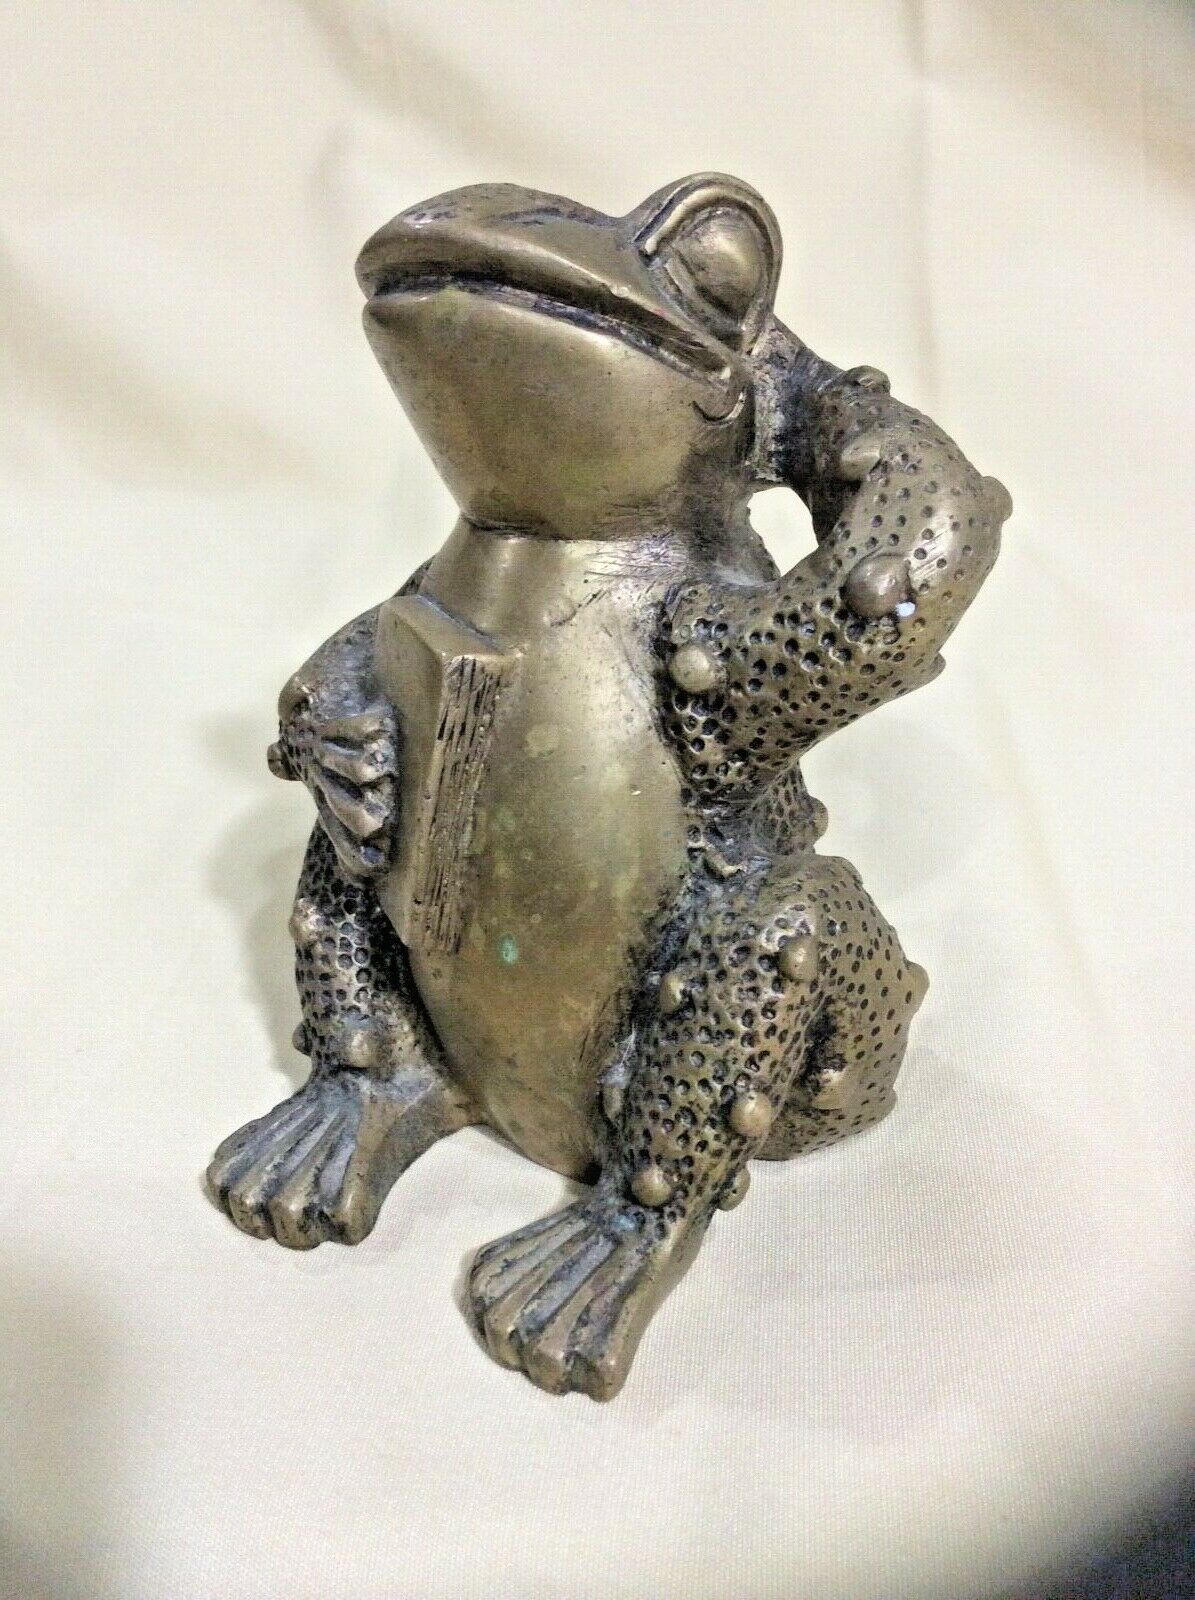 Rare  Vintage  Brass Frog  Figurine  With Book   Heavy   4.5" High    A++